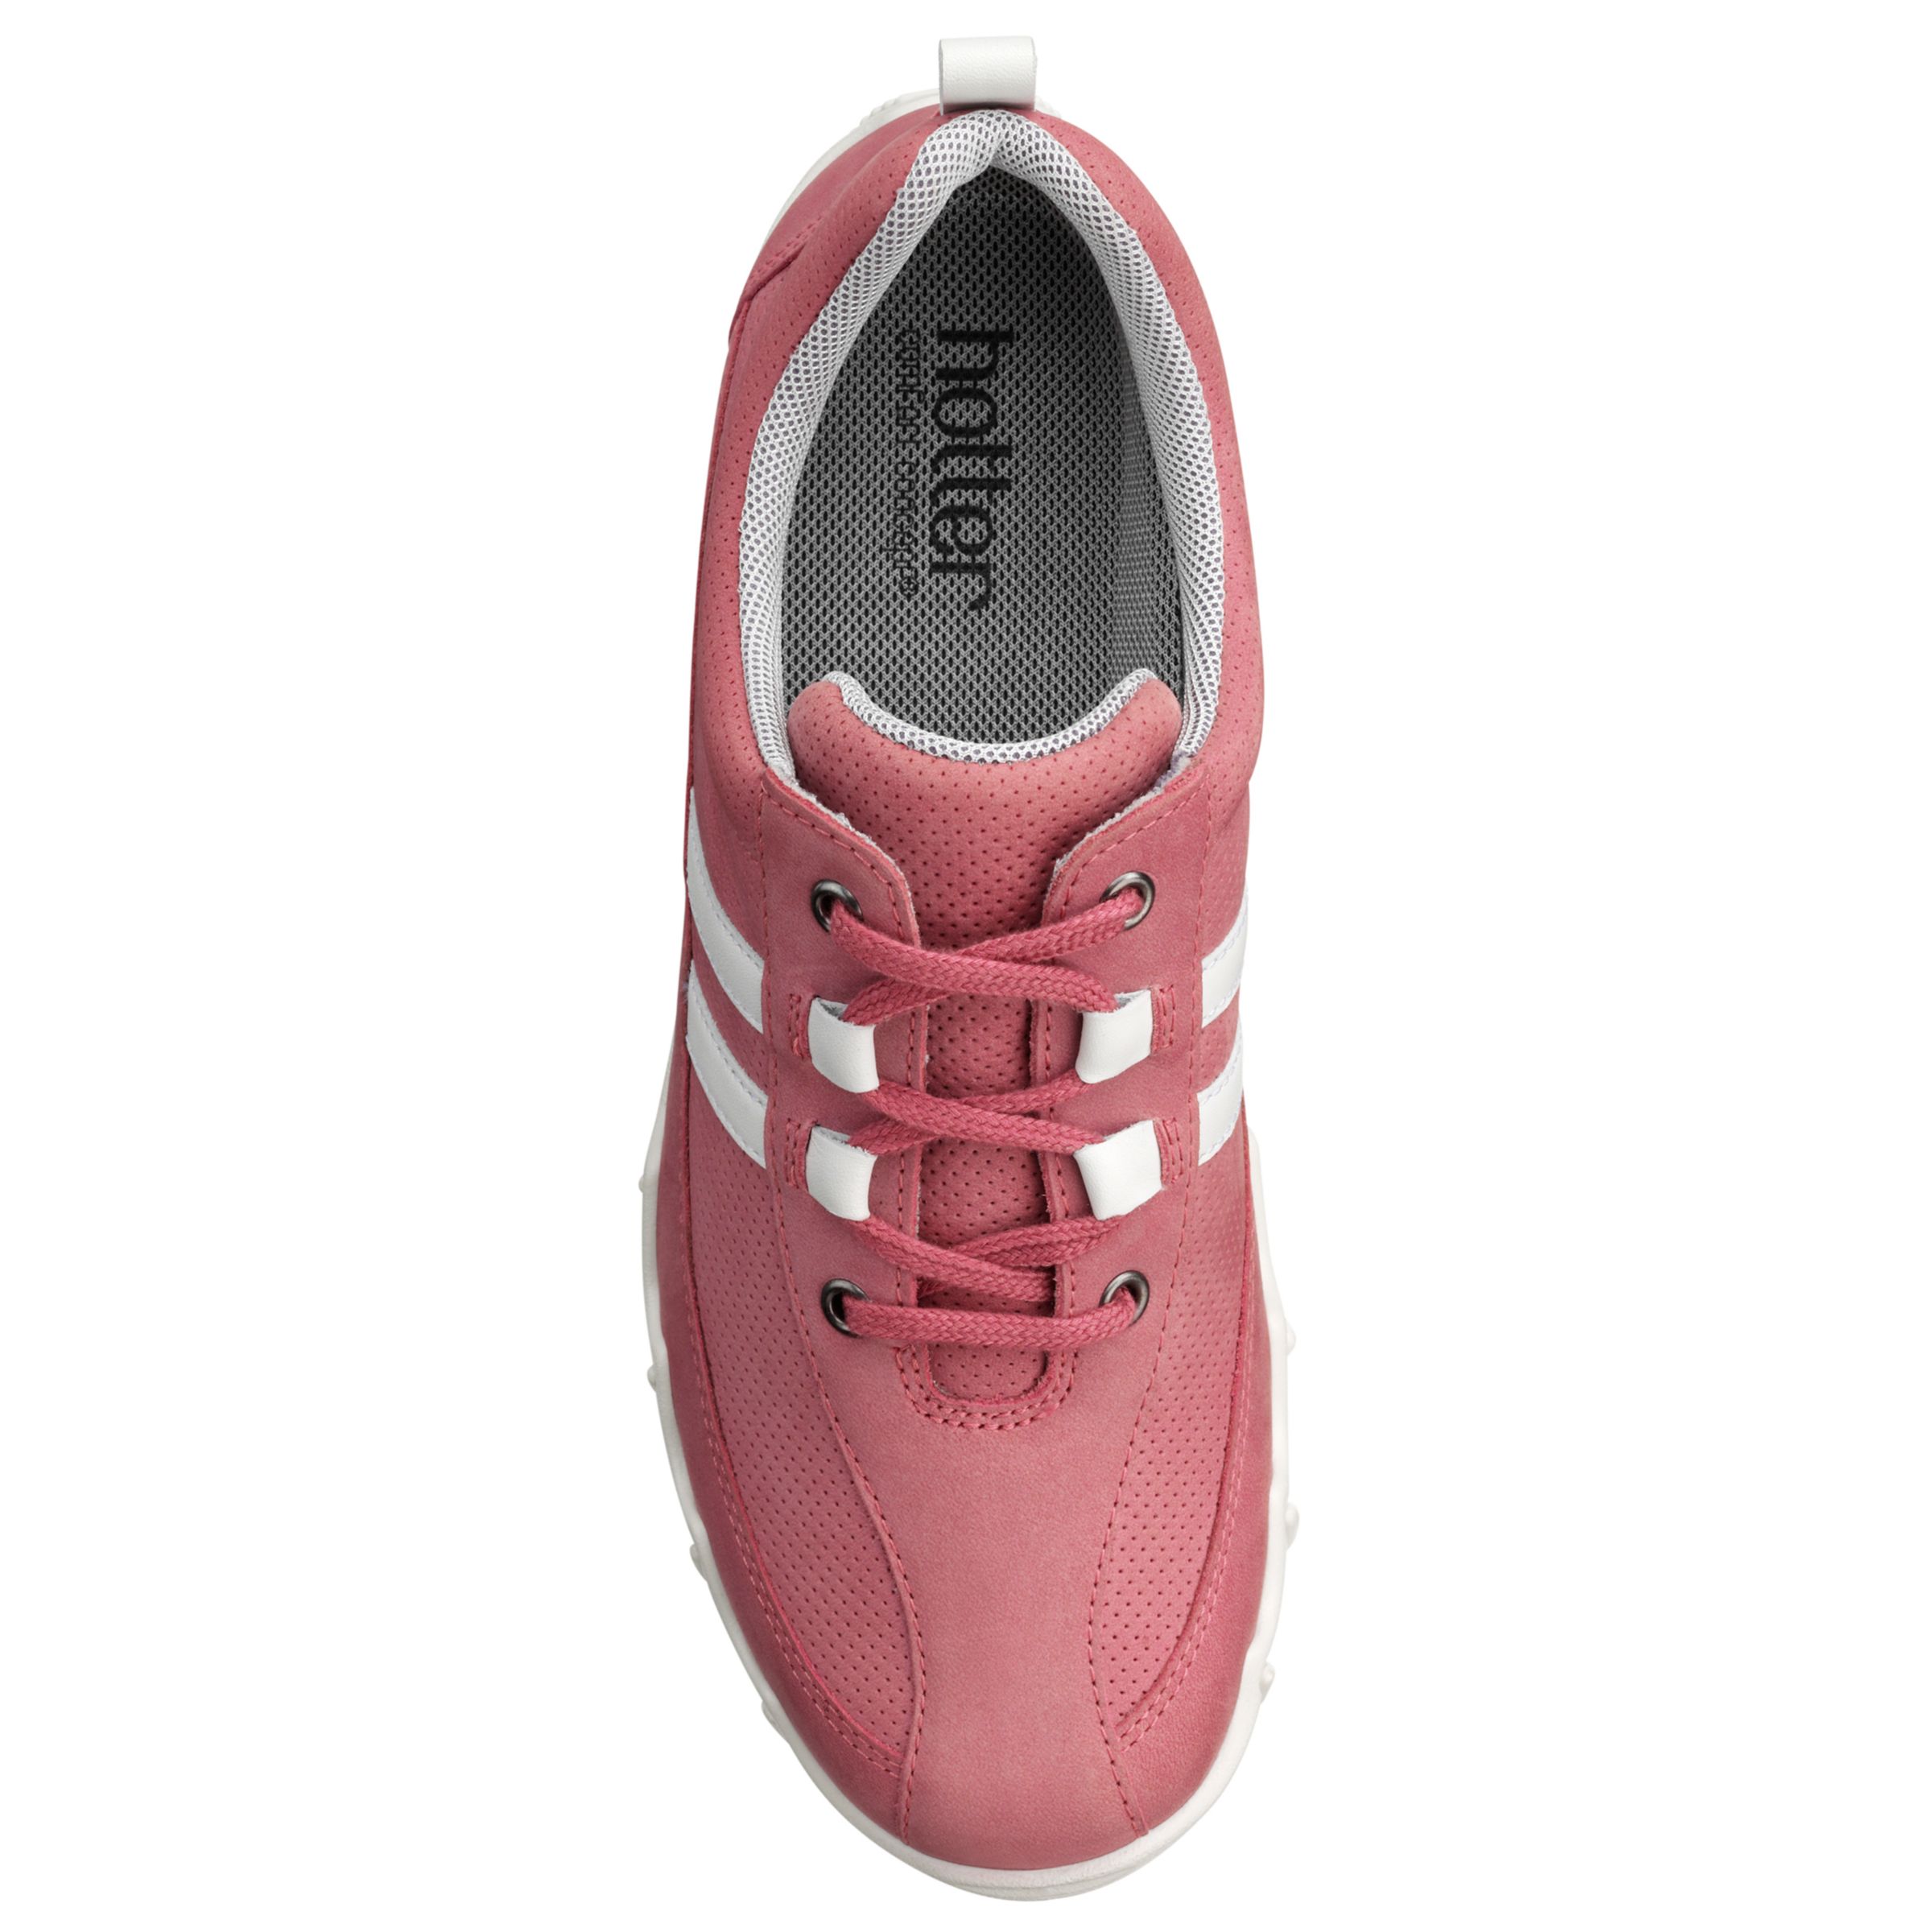 hotter shoes ladies trainers